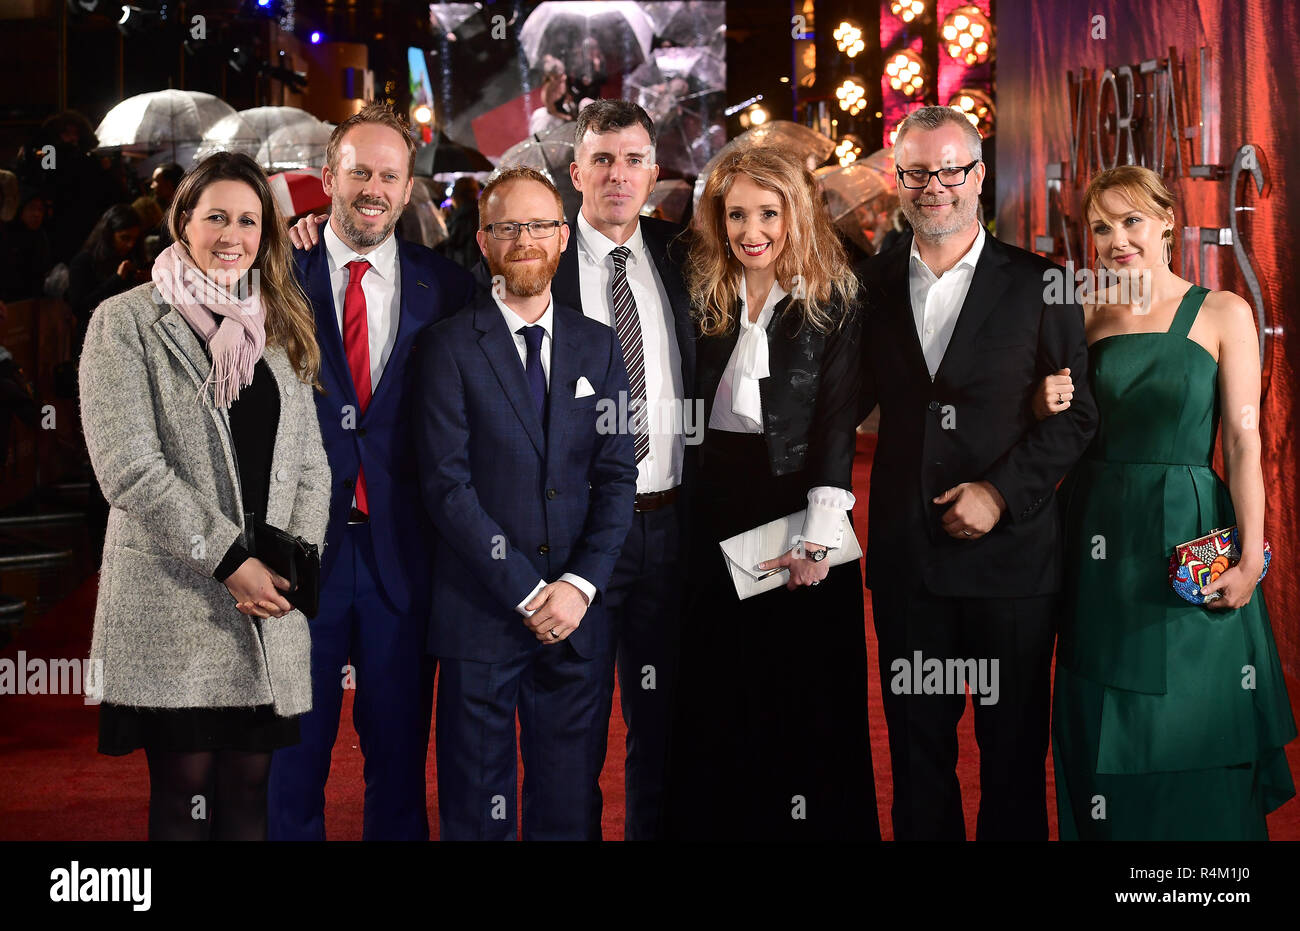 Kevin Smith (centre) and Ken McGaugh (second right) with the Visual Effects Team attending the Mortal Engines World Premiere held at Cineworld in Leicester Square, London. Stock Photo